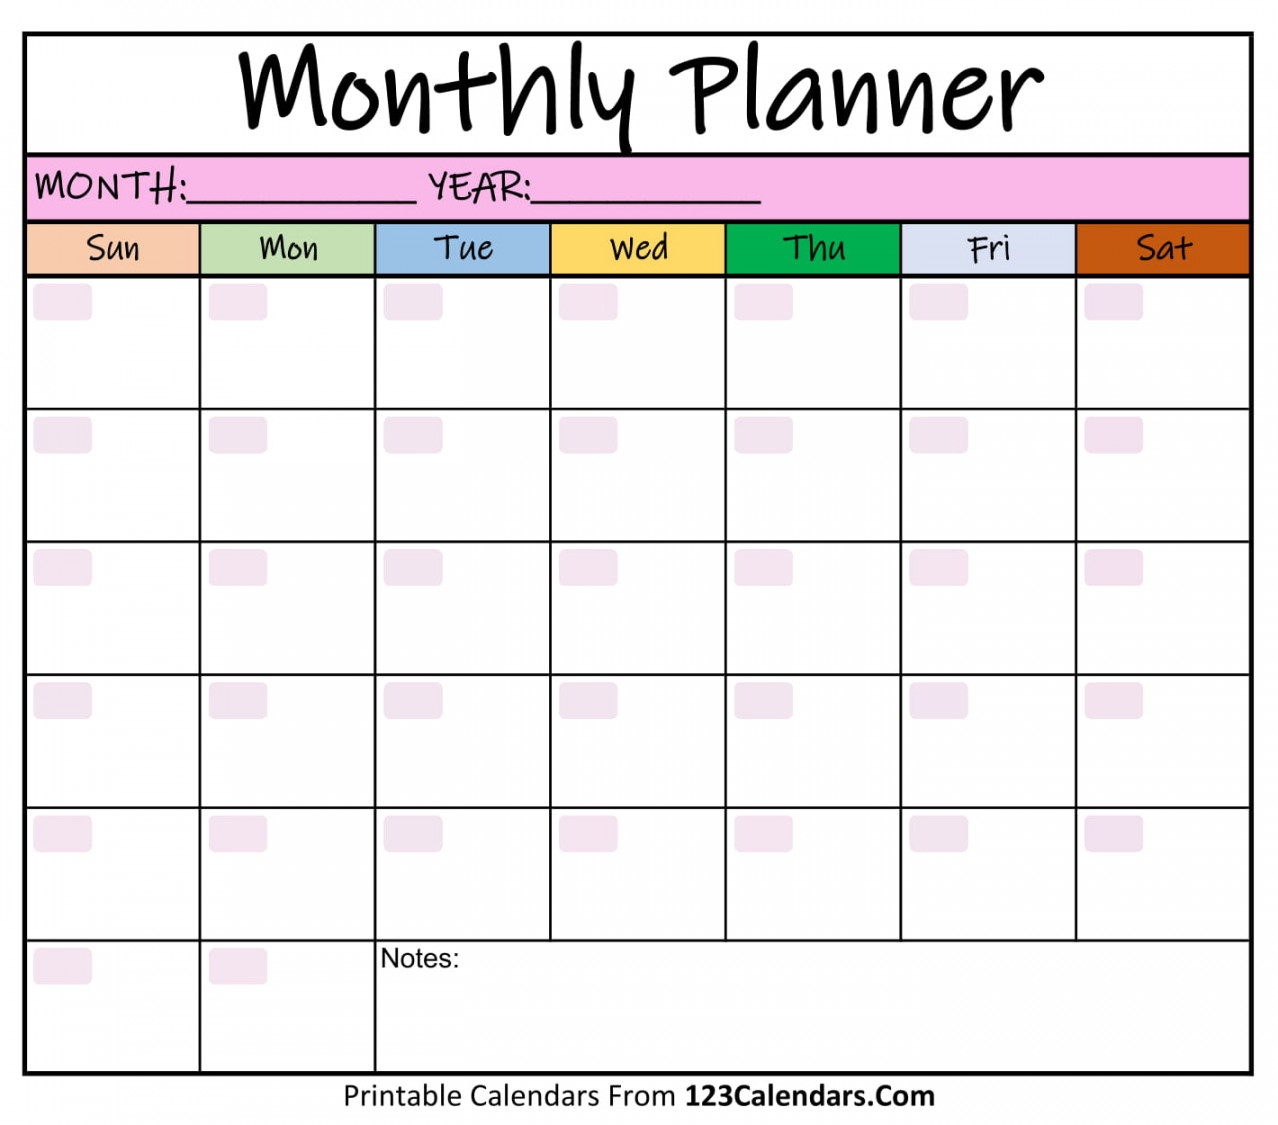 Printable Monthly Planner Templates  Calendars